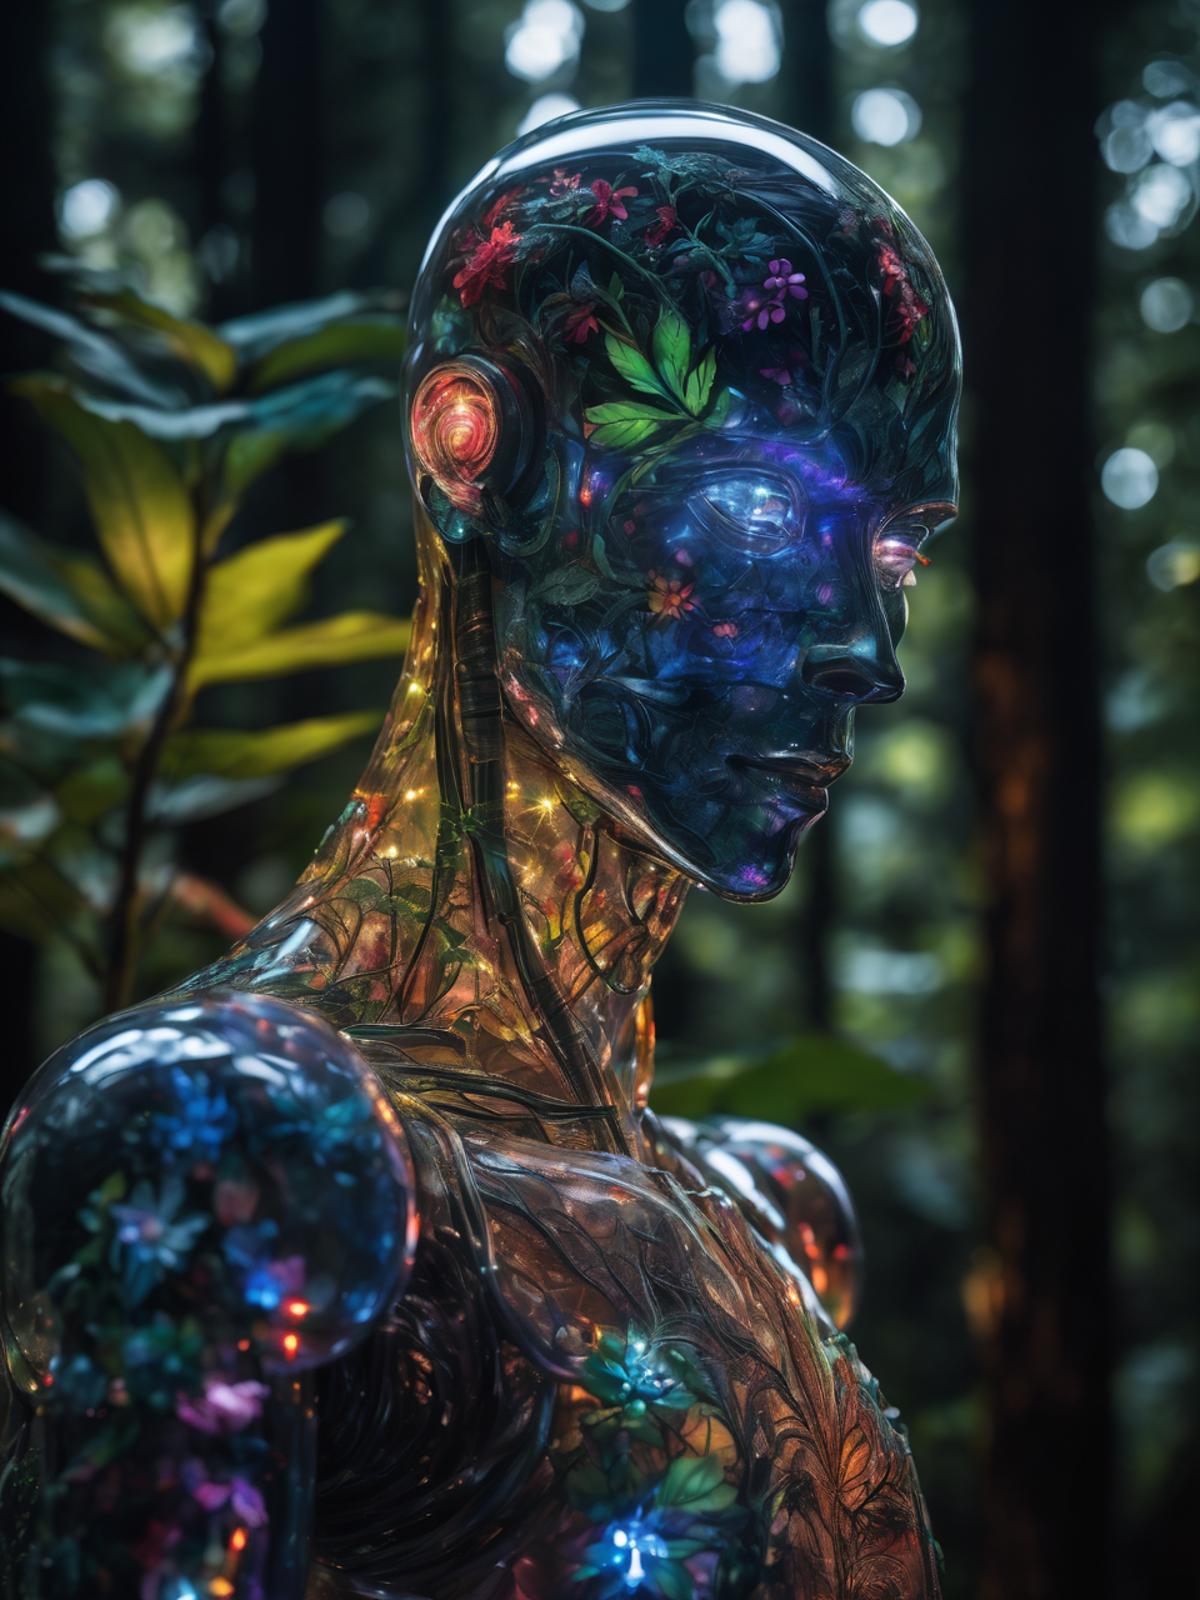 A colorful, glowing, and decorative statue of a person in a forest.